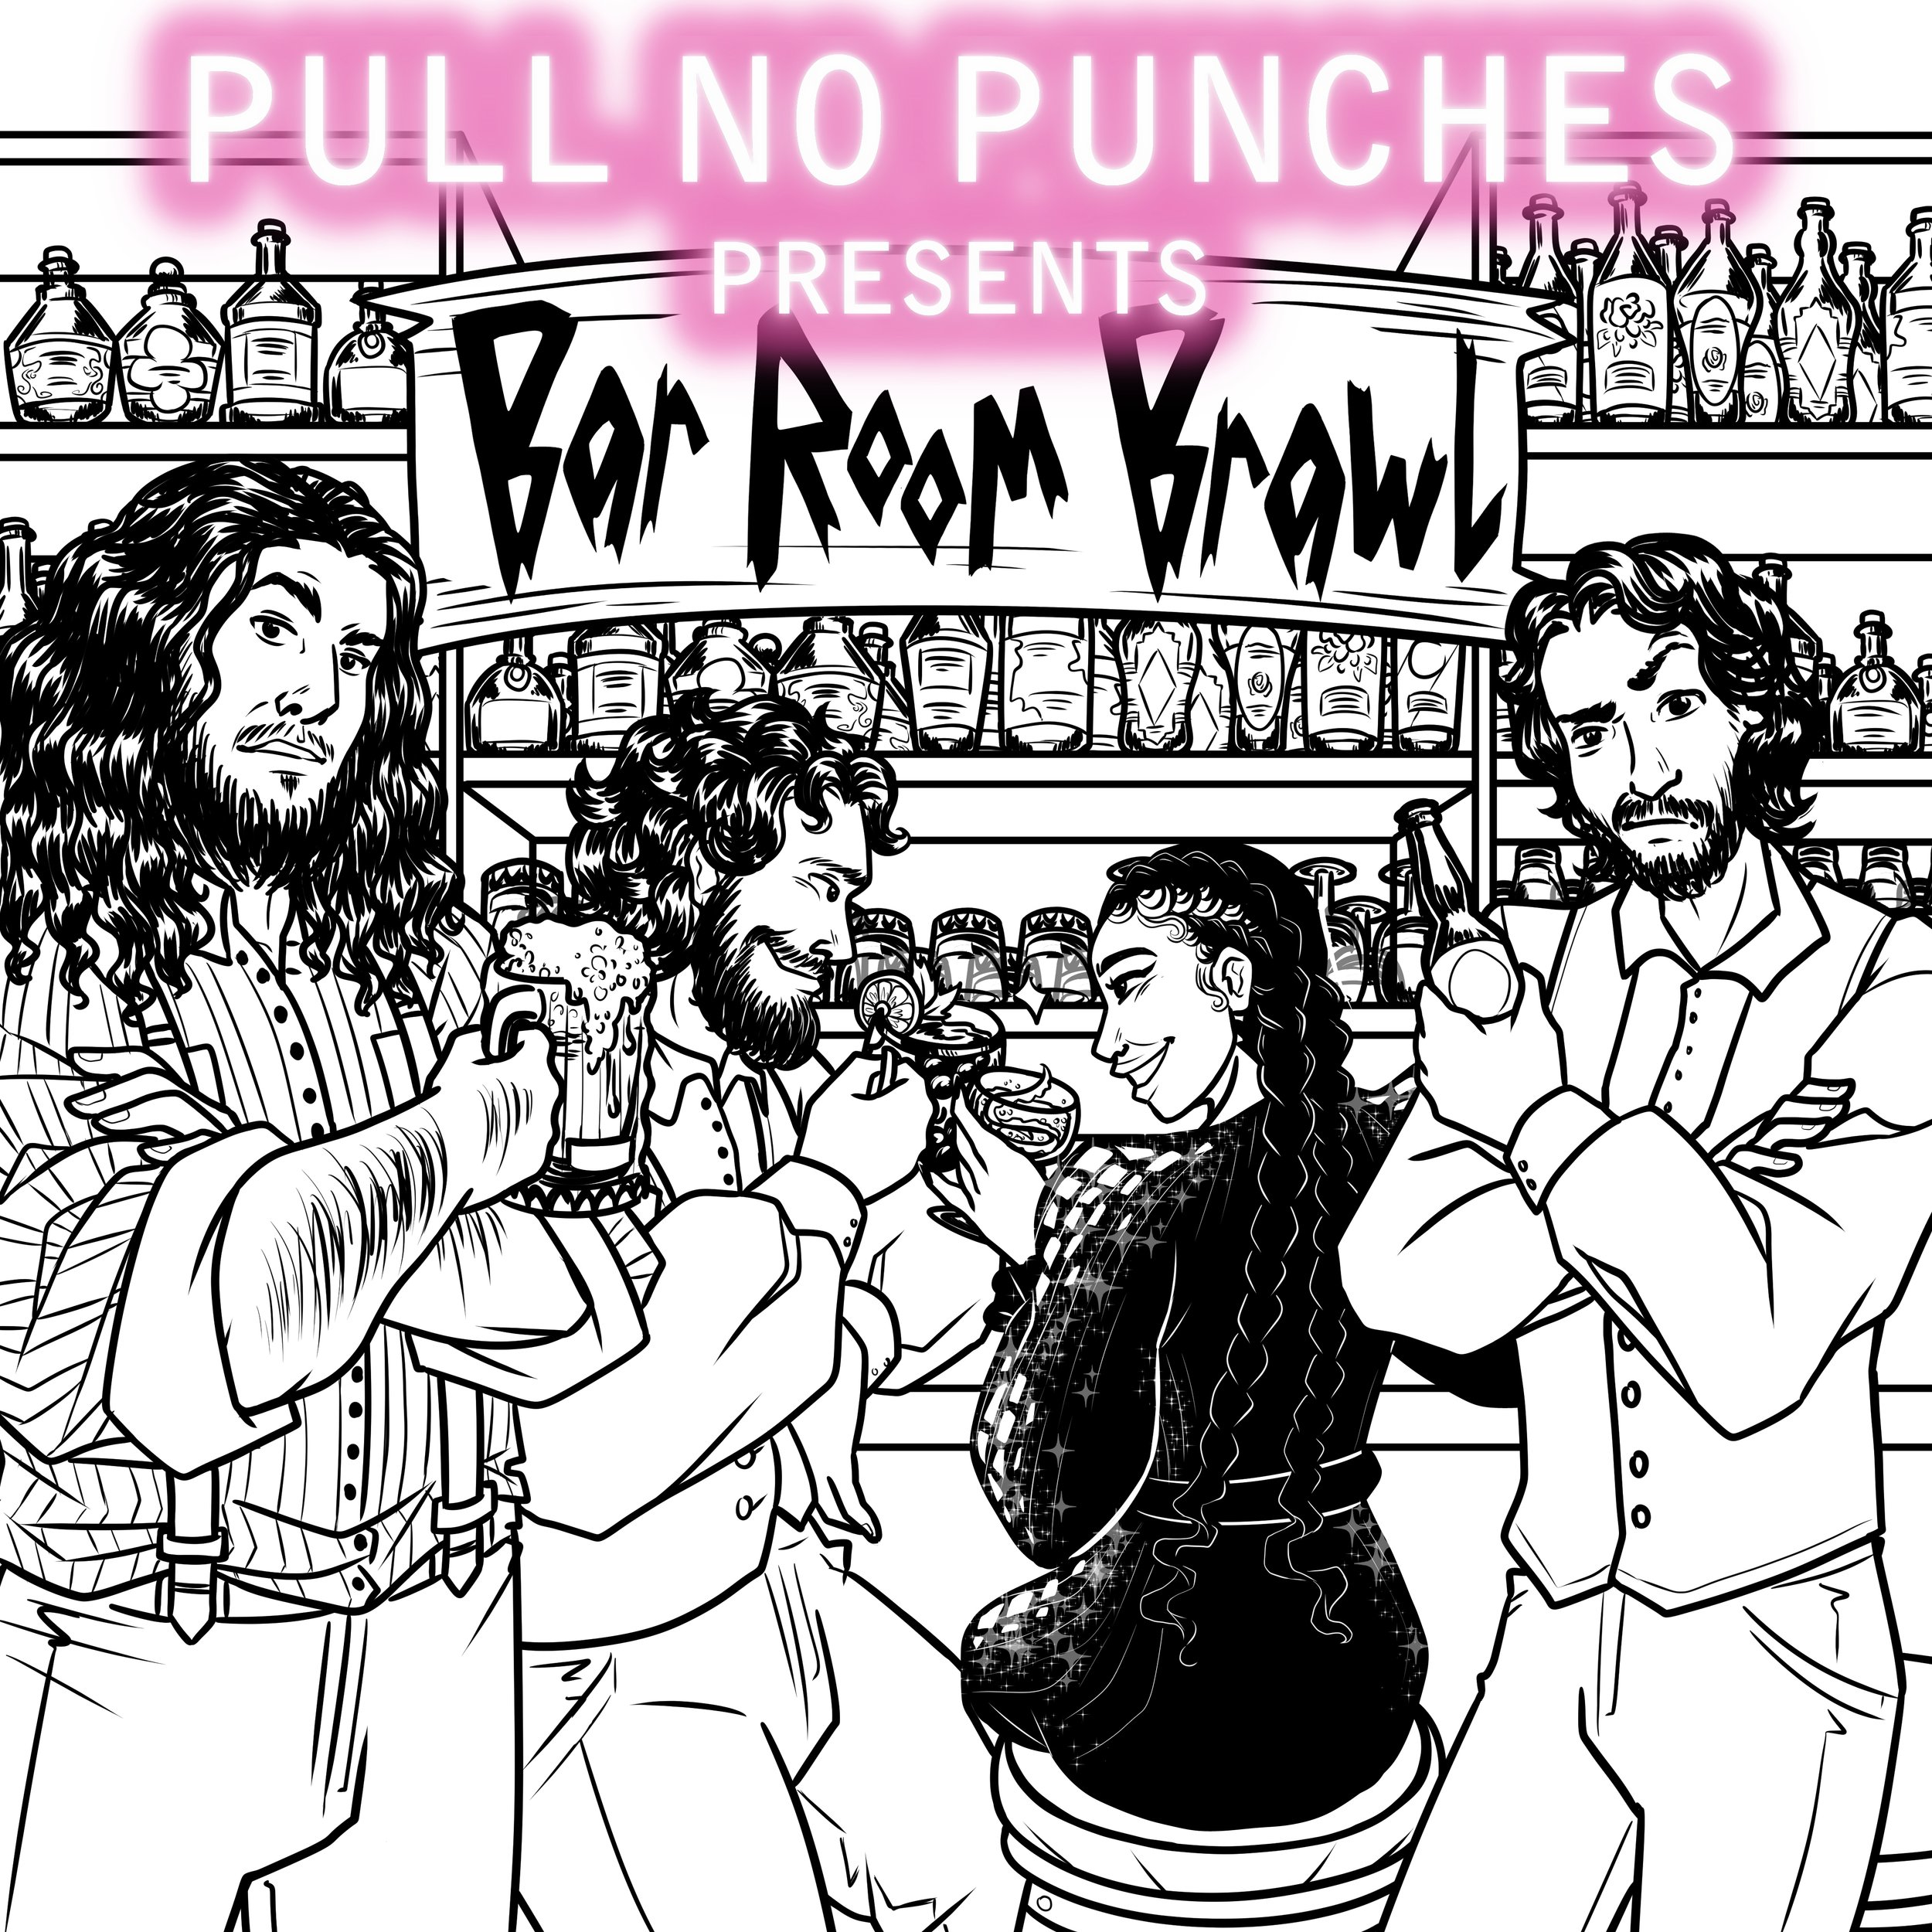 Commission_PullNoPunches_BarRoomBrawl_INKS.jpg